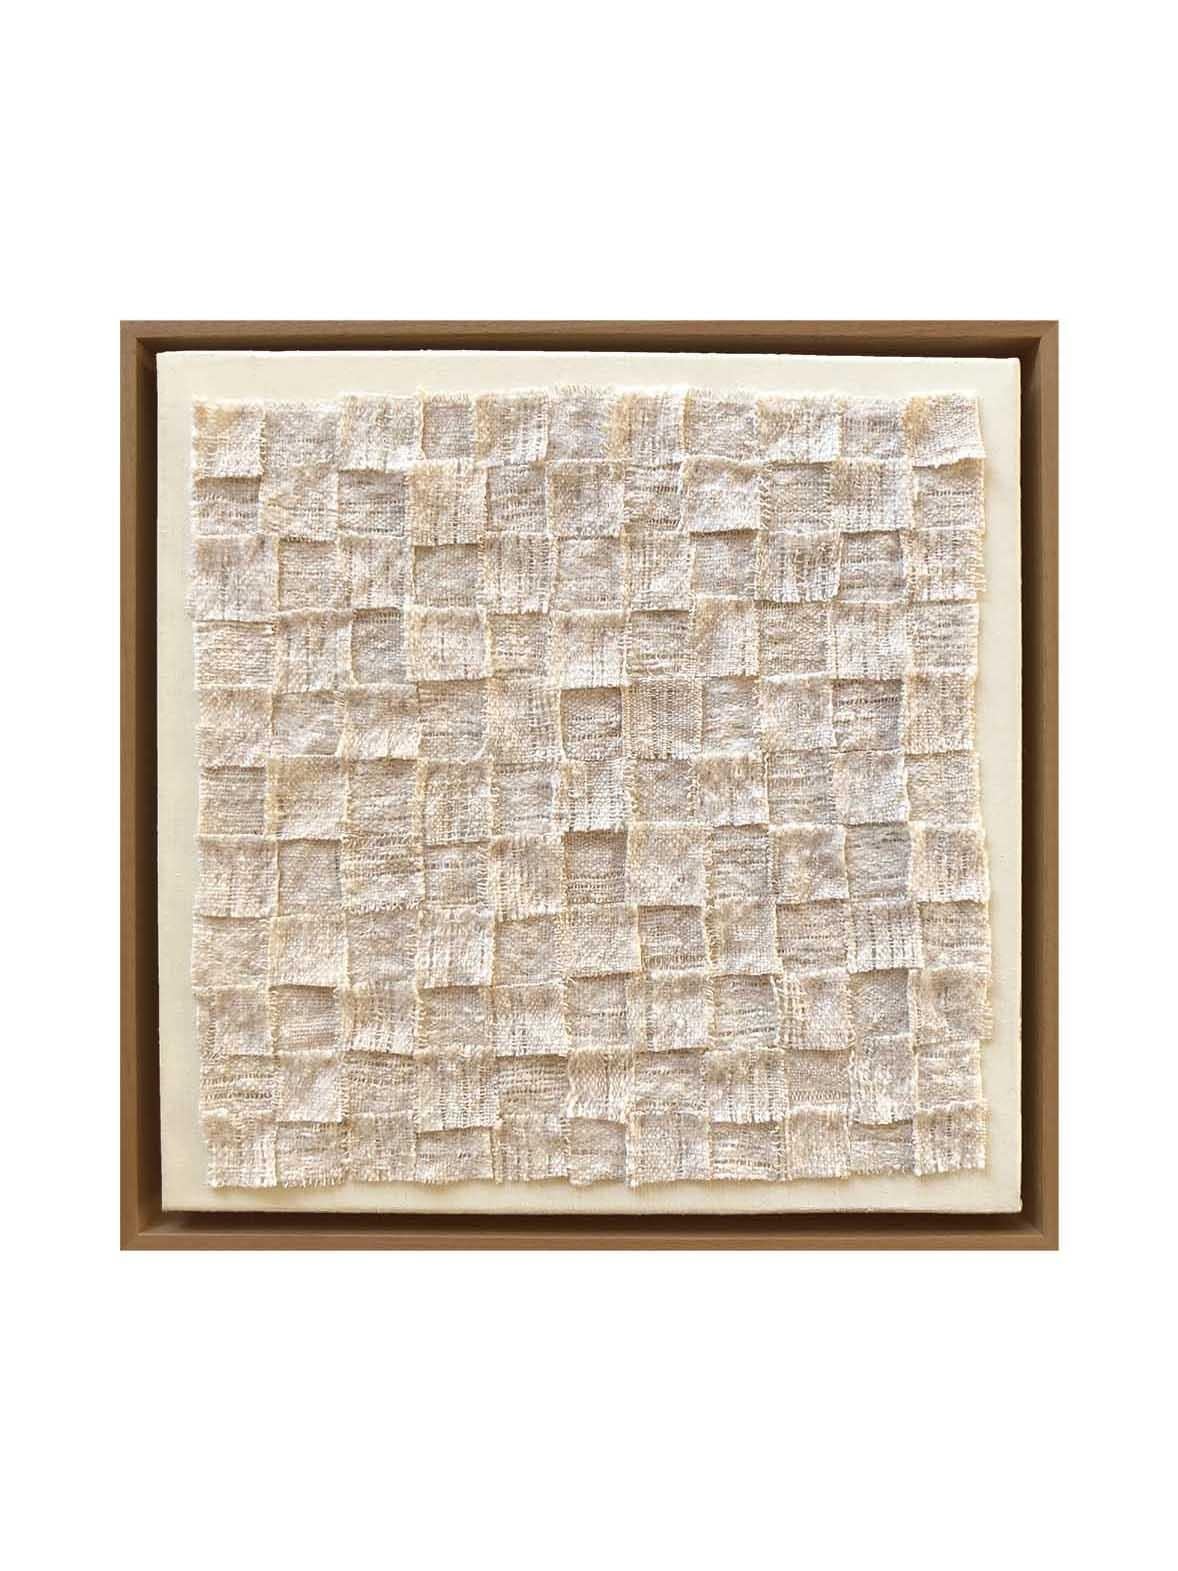 Embroidered Large Size, White Textile Artwork Wall Piece, Made of handspun handwoven Wool For Sale